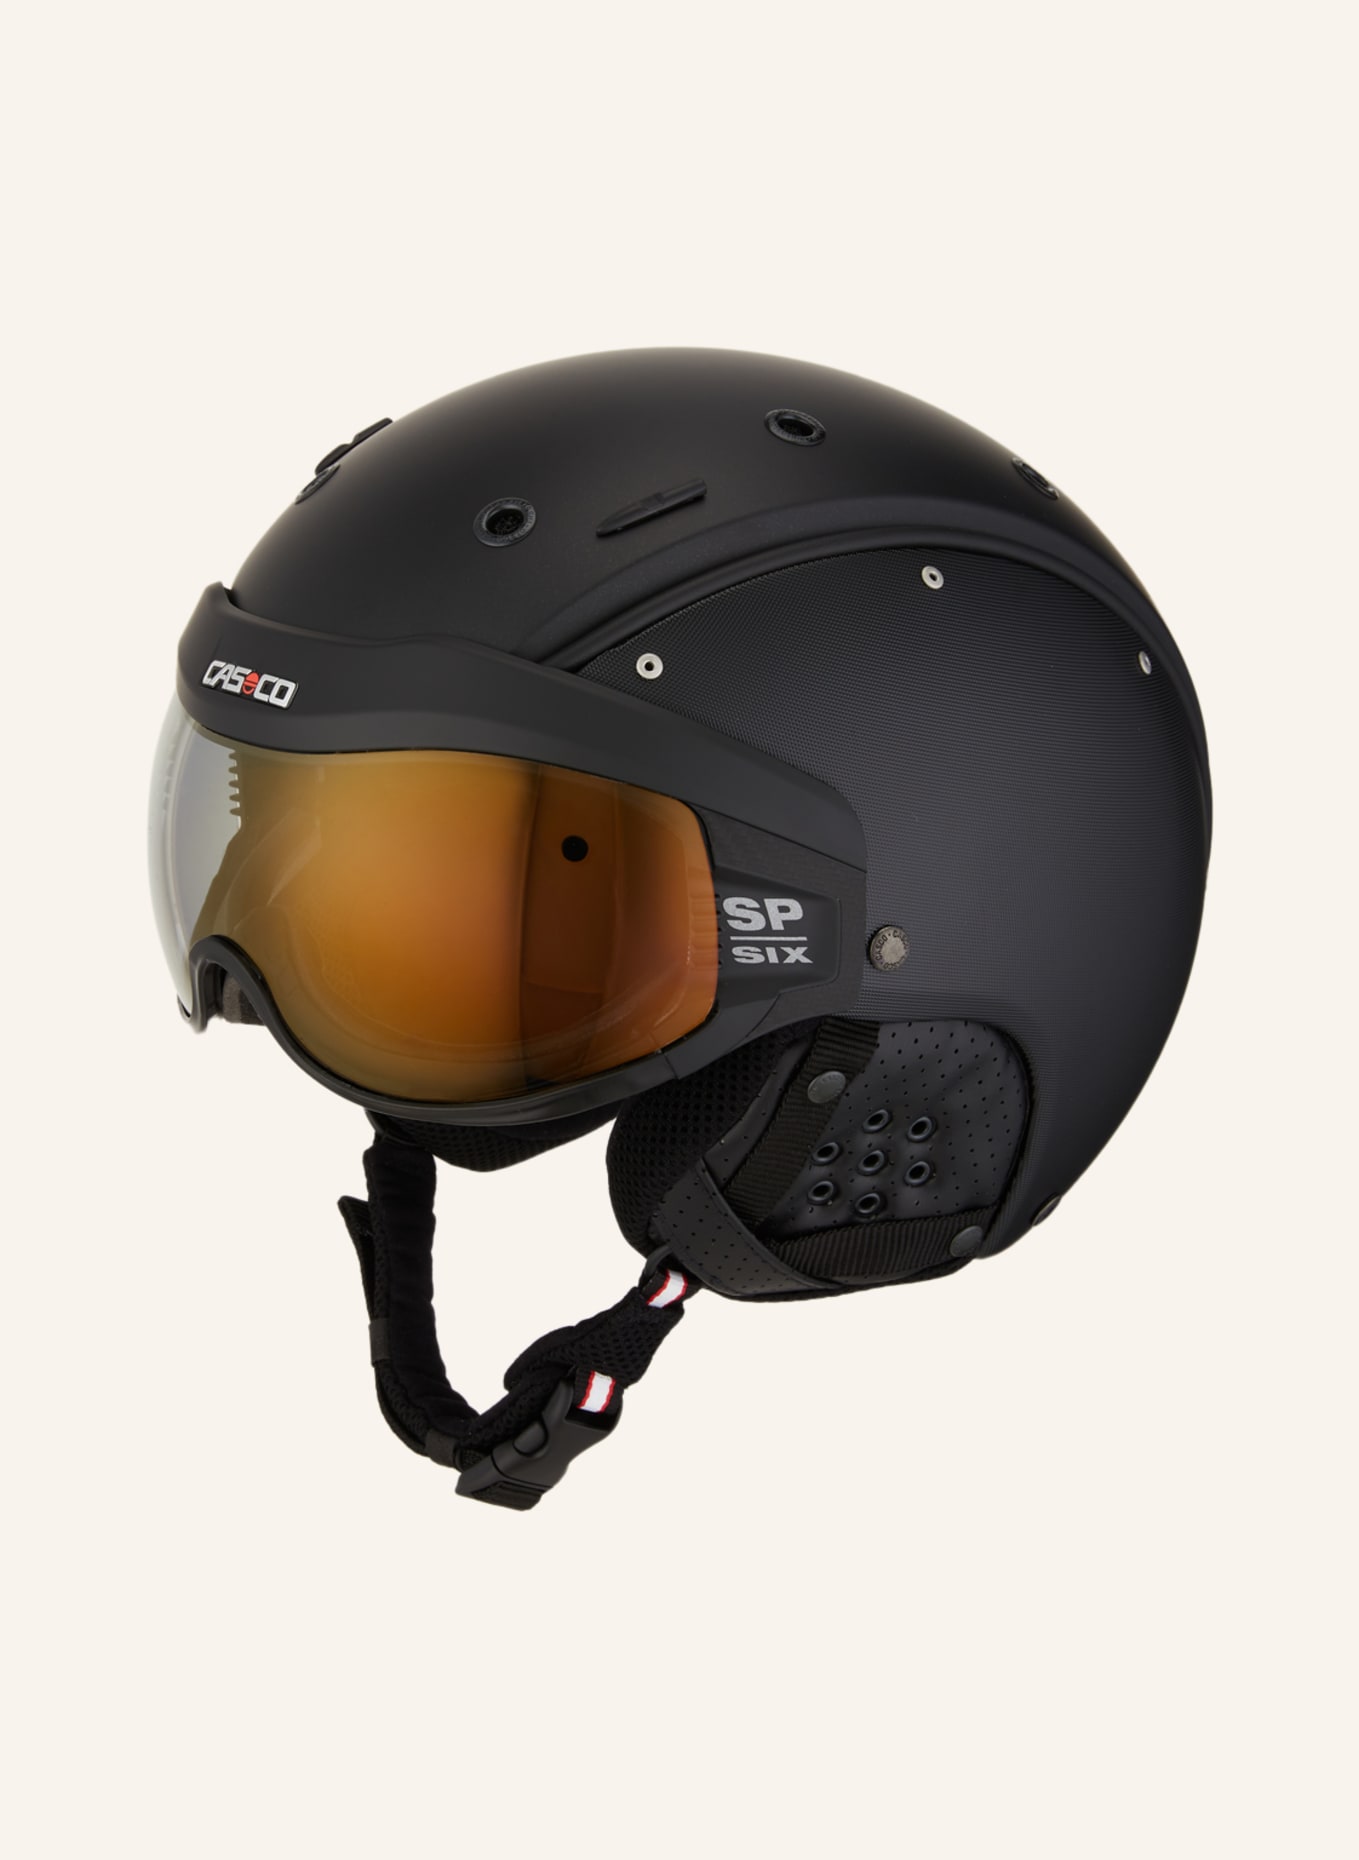 Casco ski goggles secure to your helmet with the snap of a magnet